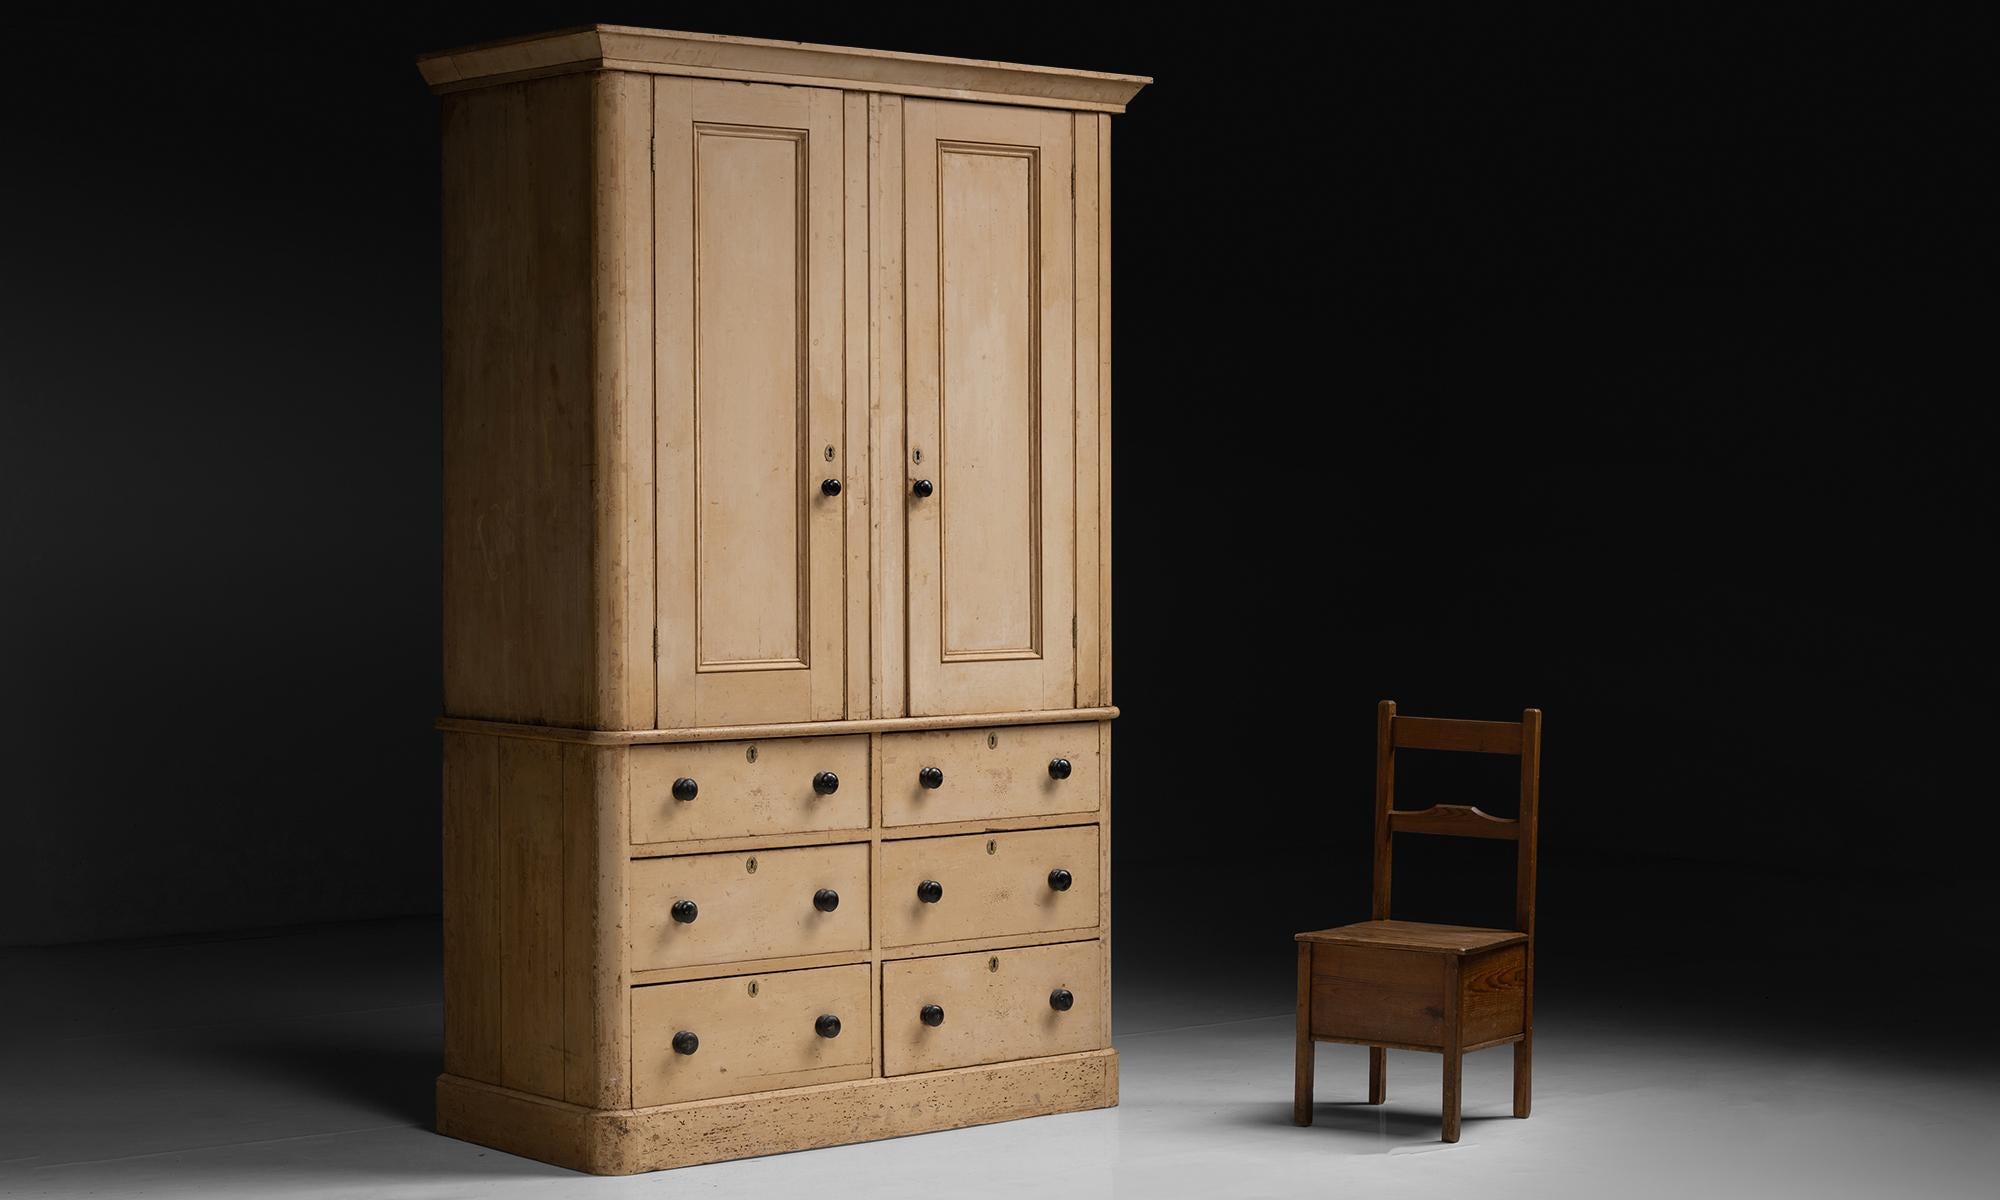 Massive Housekeepers Cupboard

England circa 1840

Original period paint, constructed in pine. Six large deep drawers with spacious cupboard above.

Measures 63”w x 31”d x 99.5”h